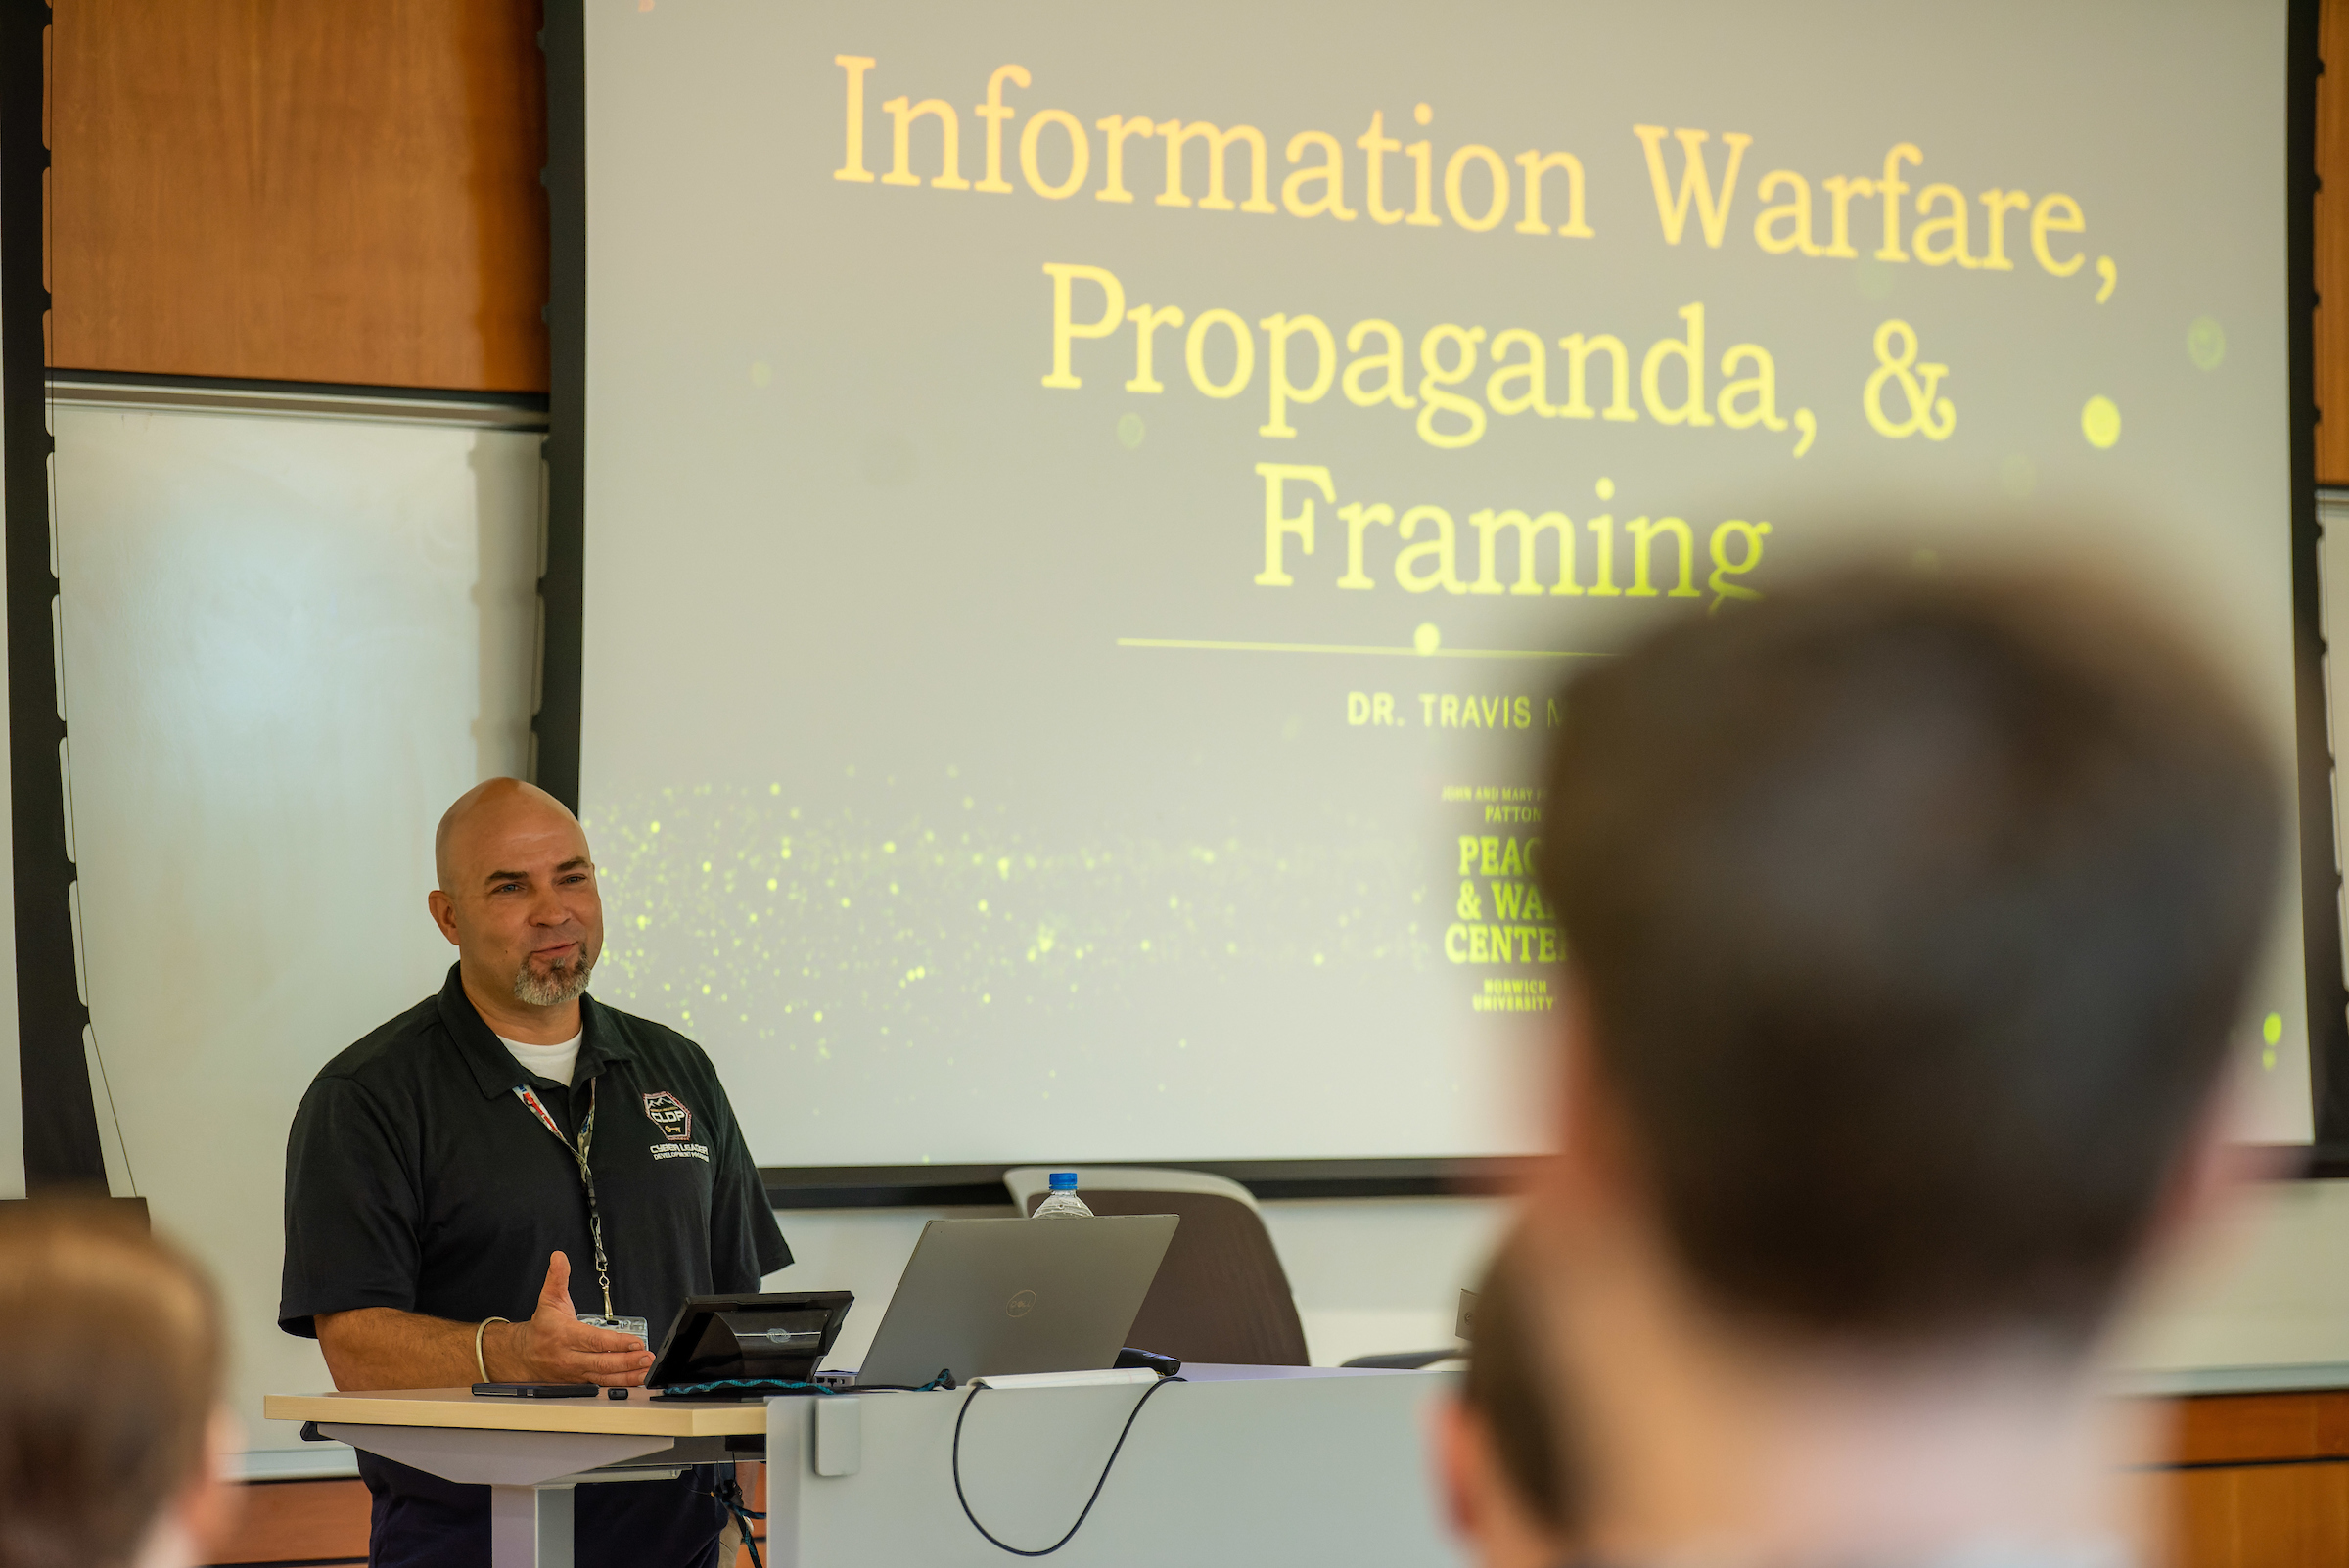 NUARI interns assist researchers in developing tools to fight weaponization of information